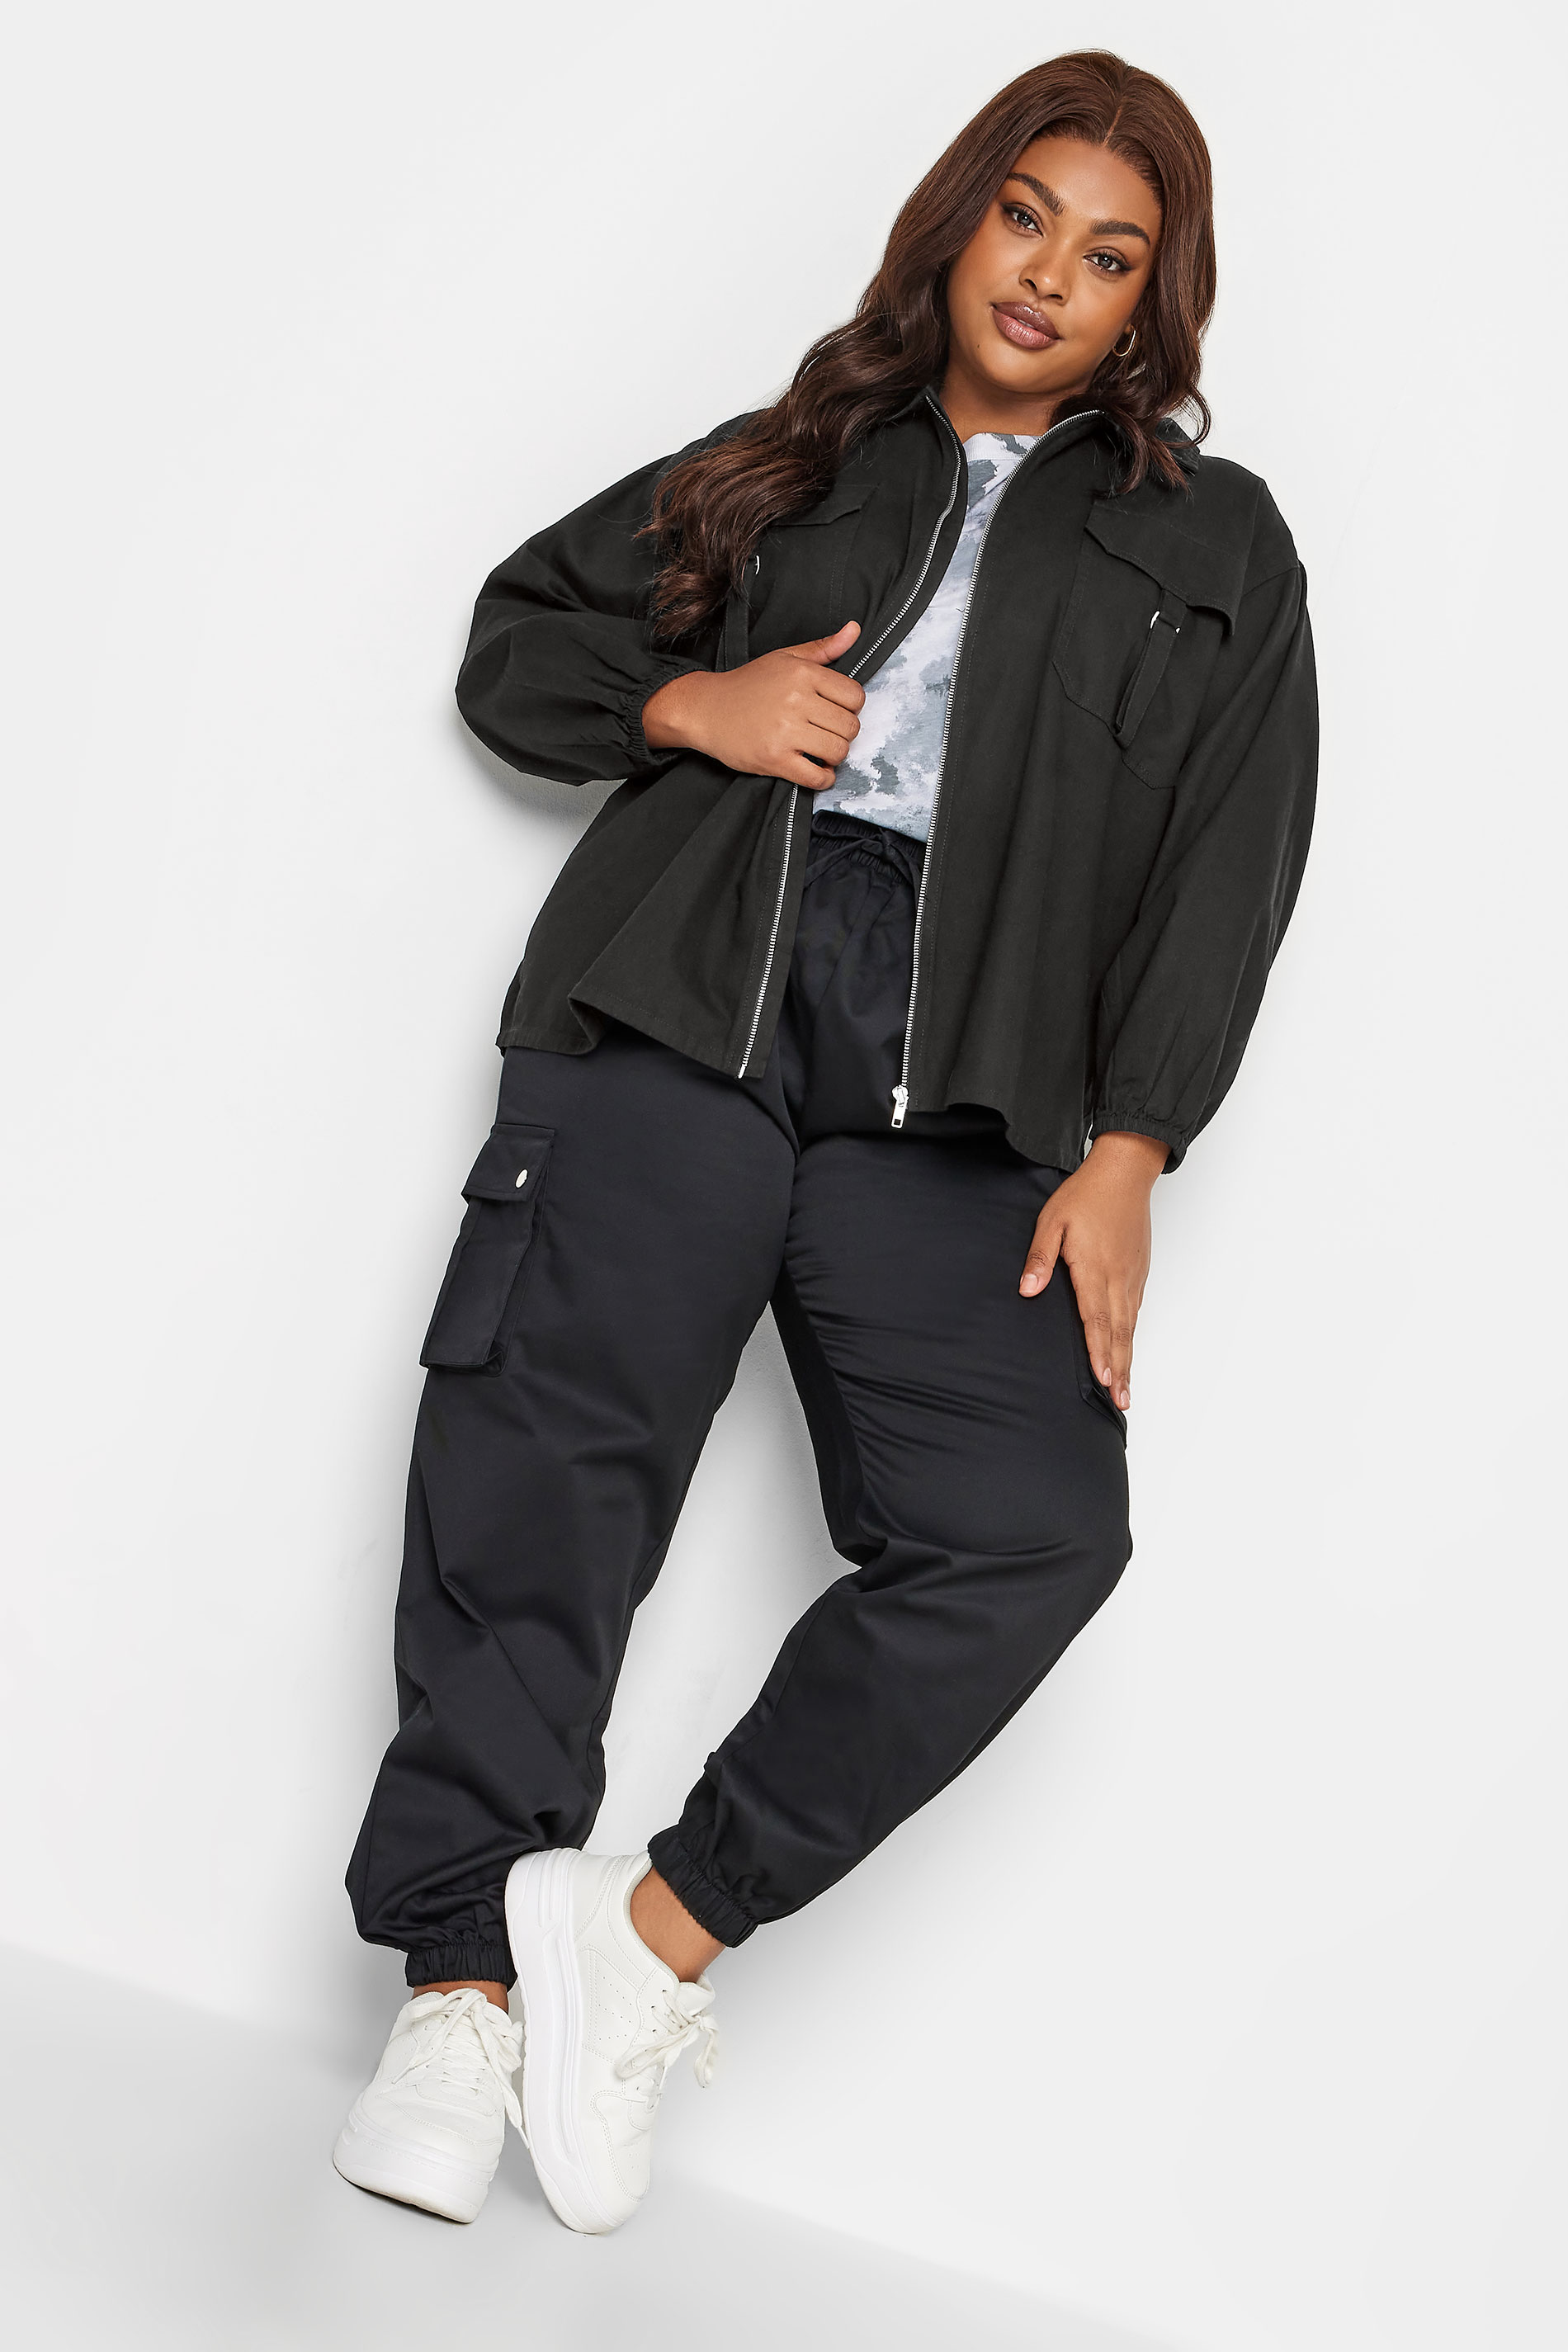 LIMITED COLLECTION Plus Size Black Utility Bomber Jacket | Yours Clothing 2